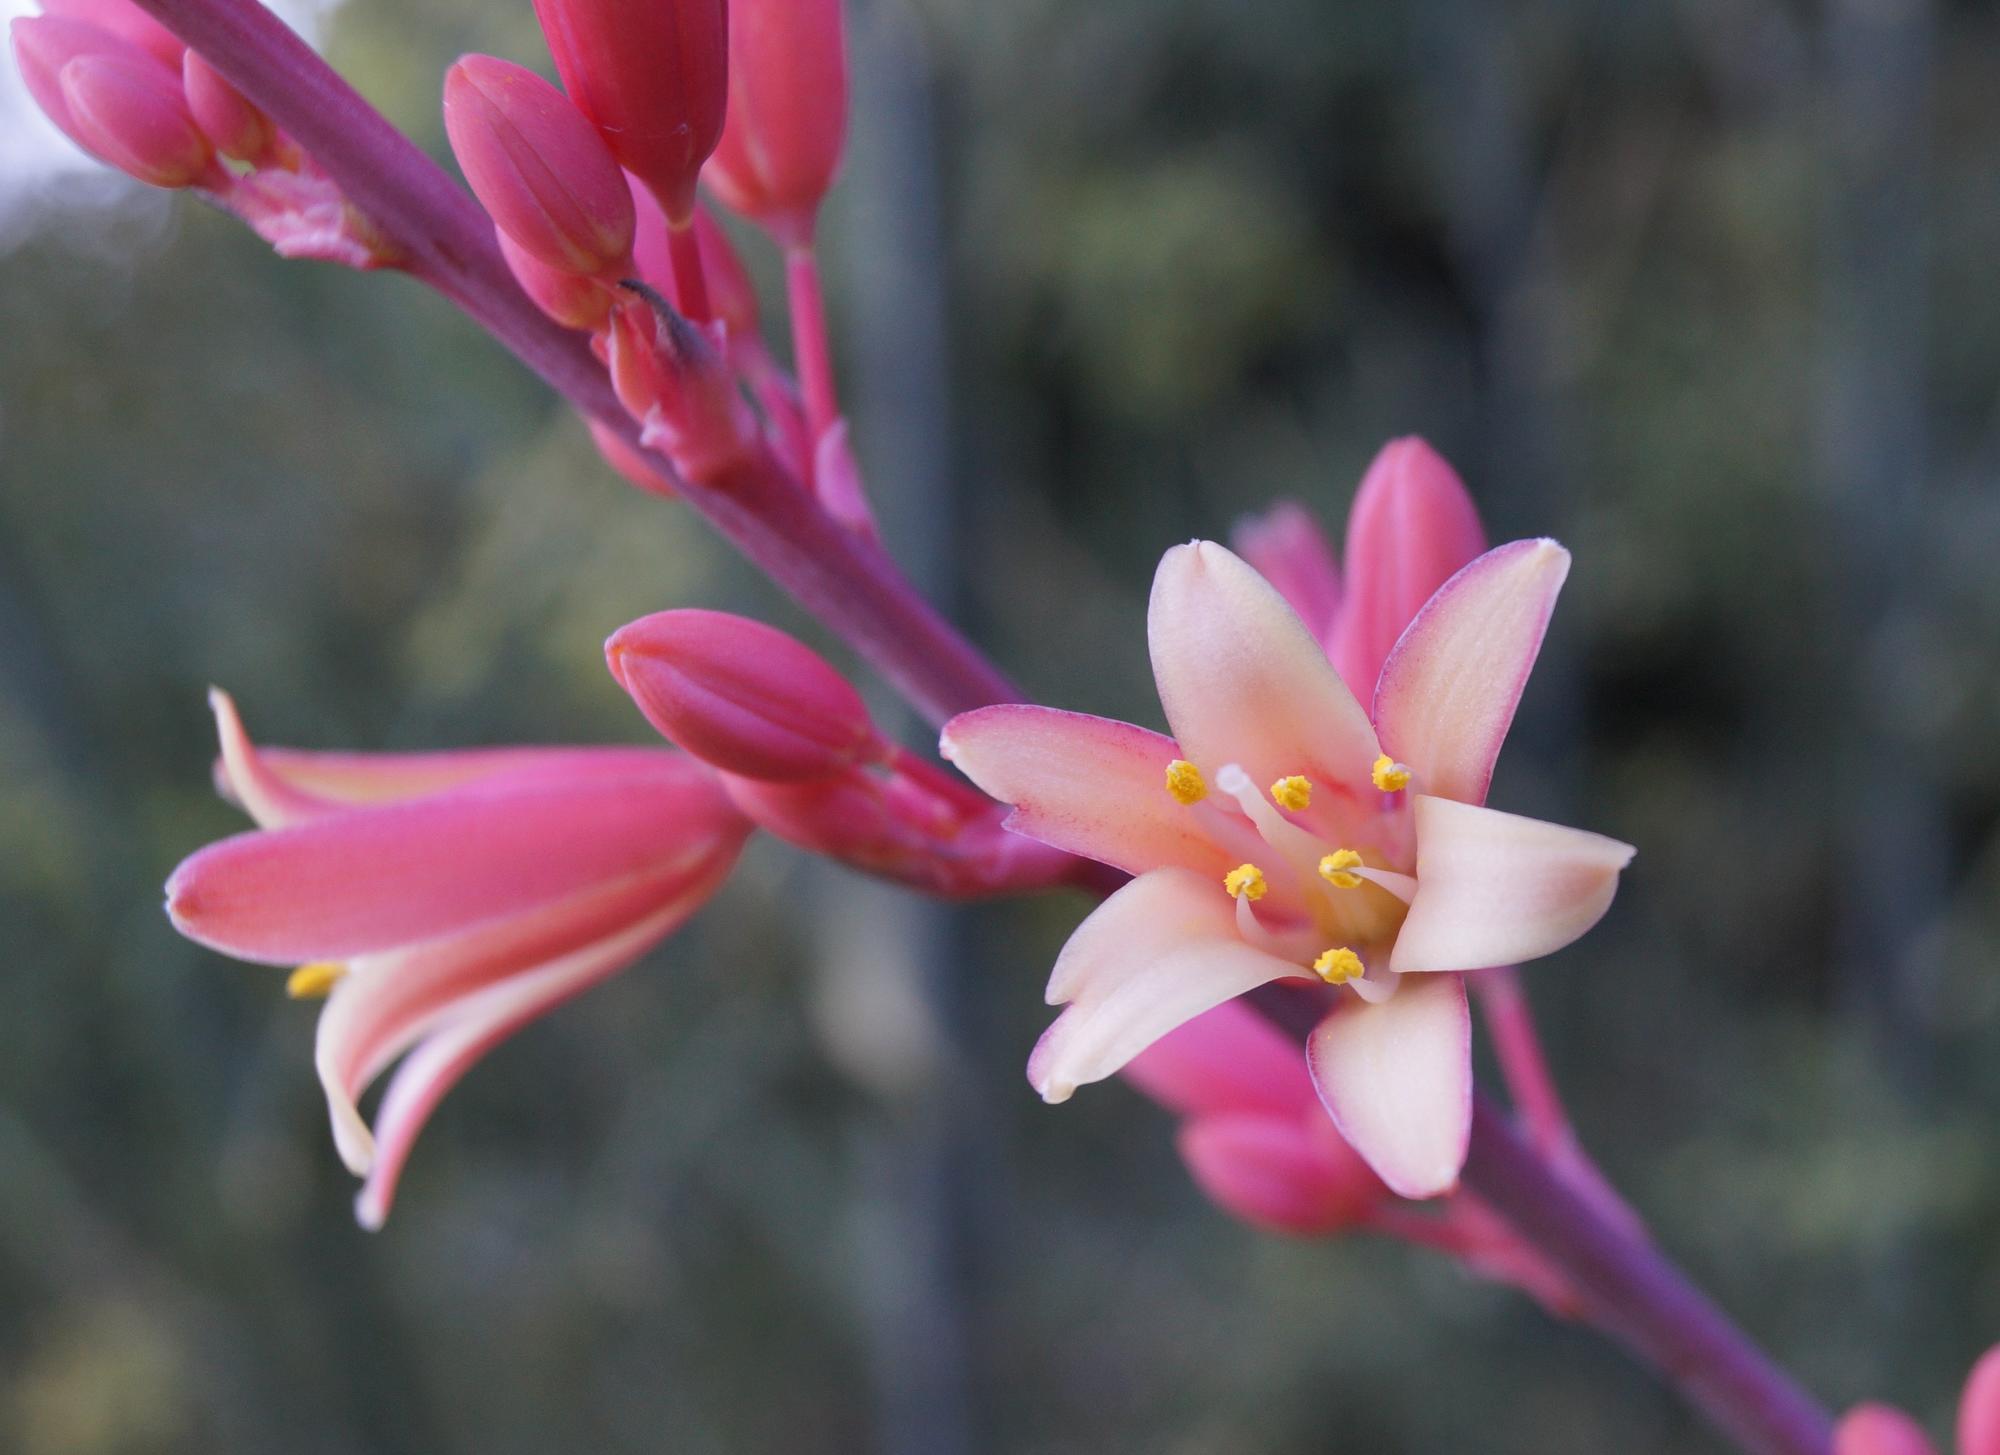 A close-up of Texas Red Yucca blooms.